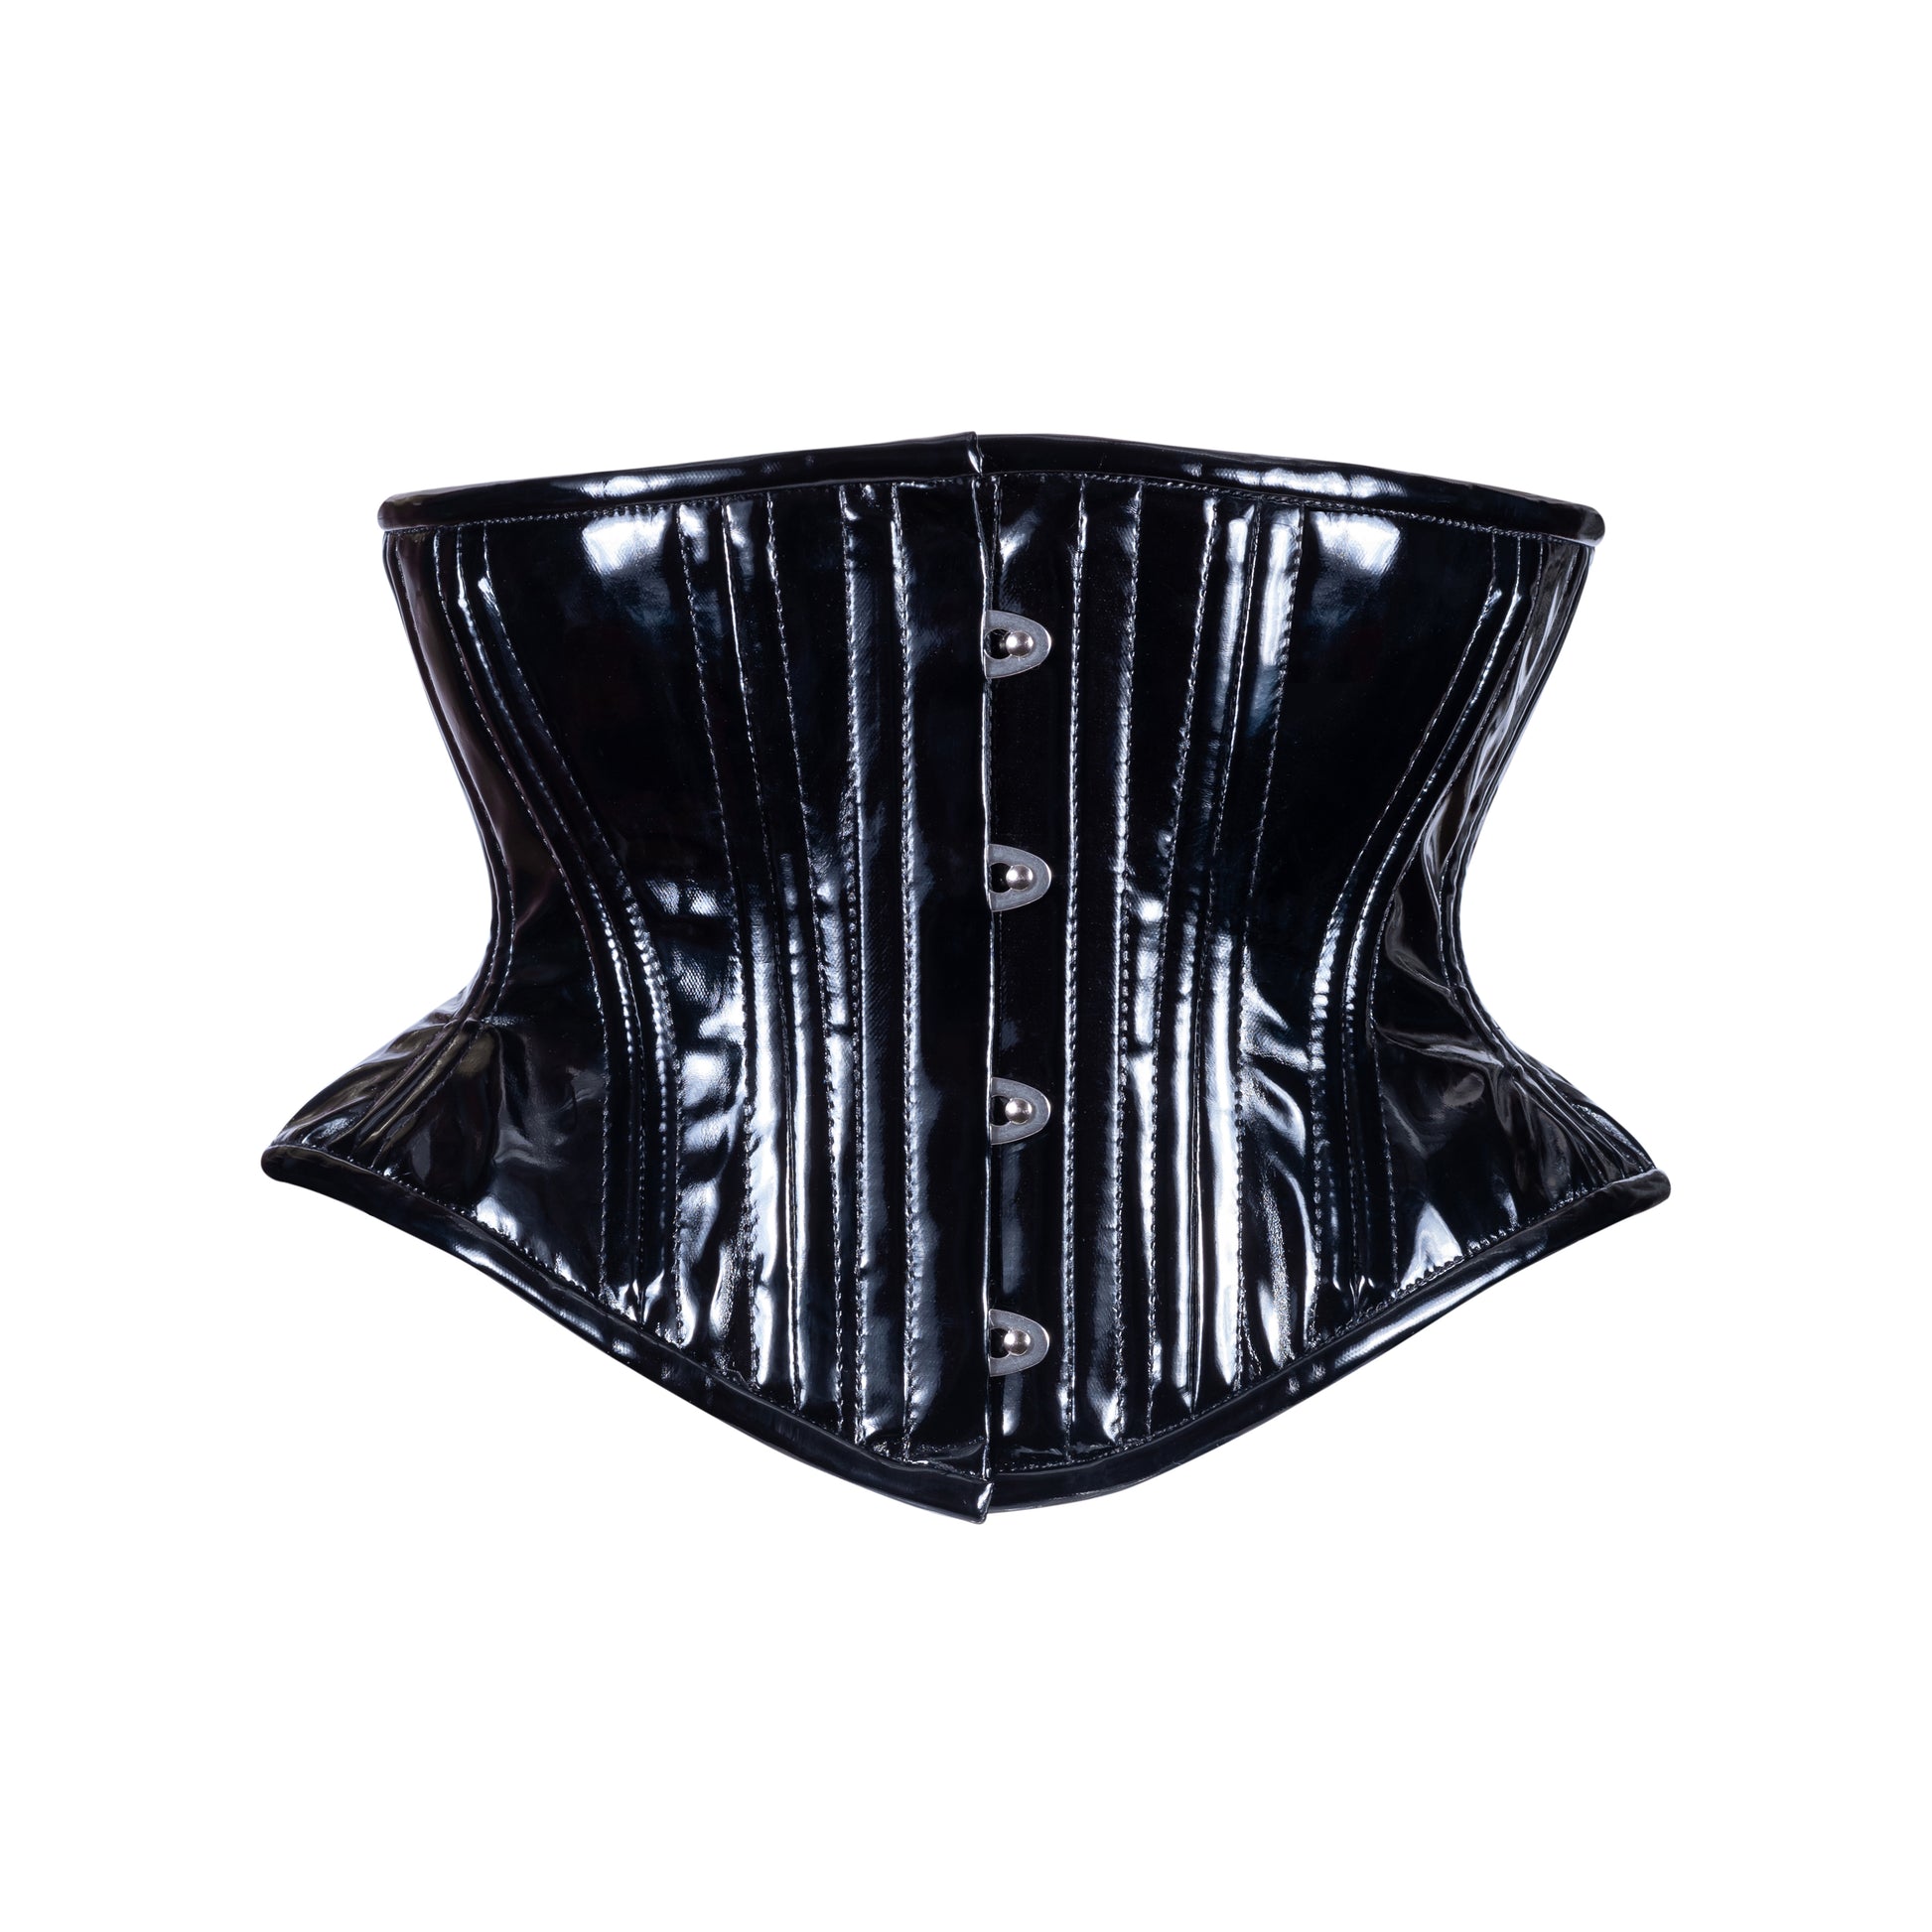 Shiny PVC gothic steel-boned authentic waspie corset for tight